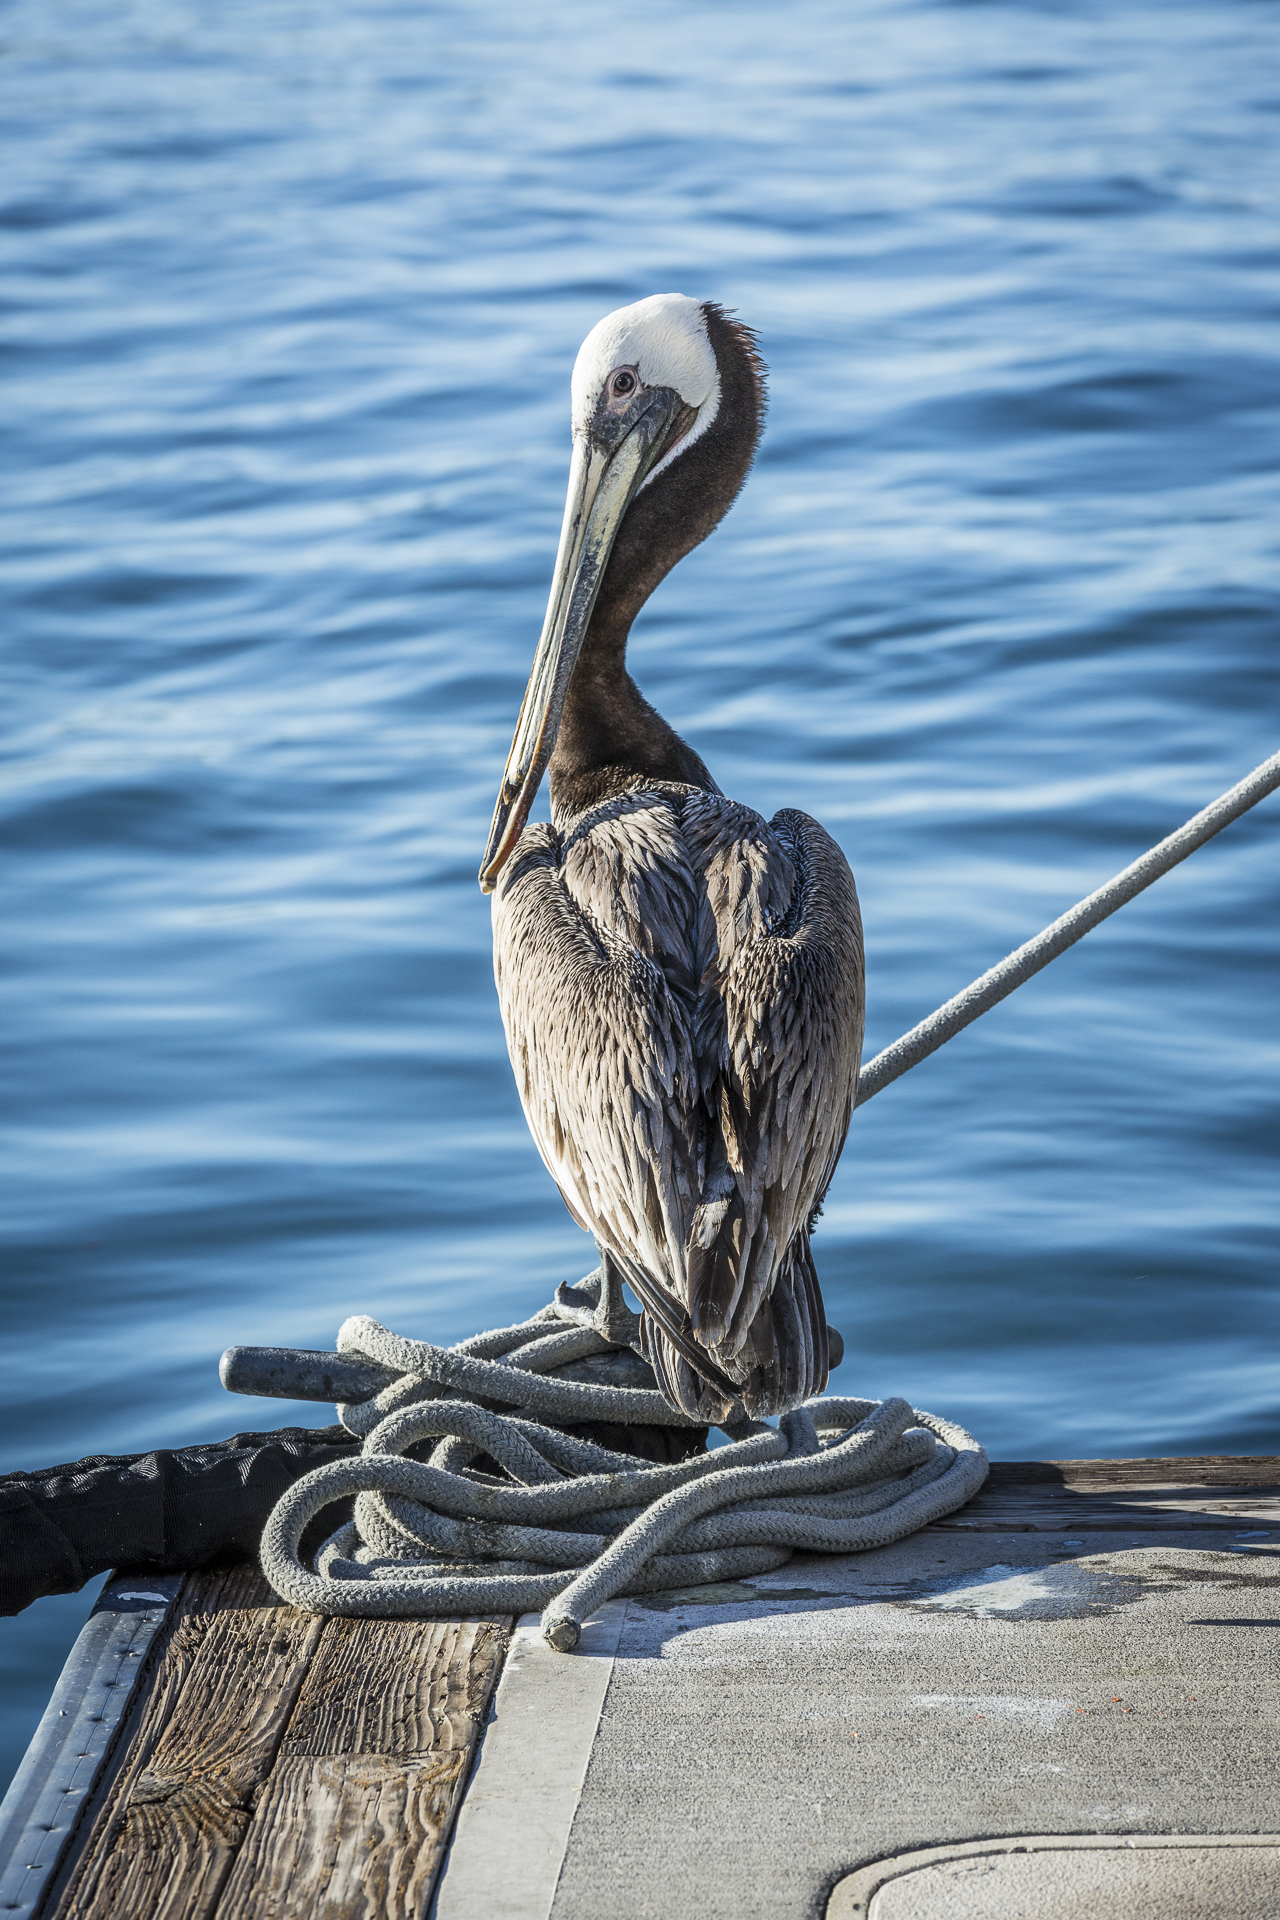 pelican on a dock by the sea